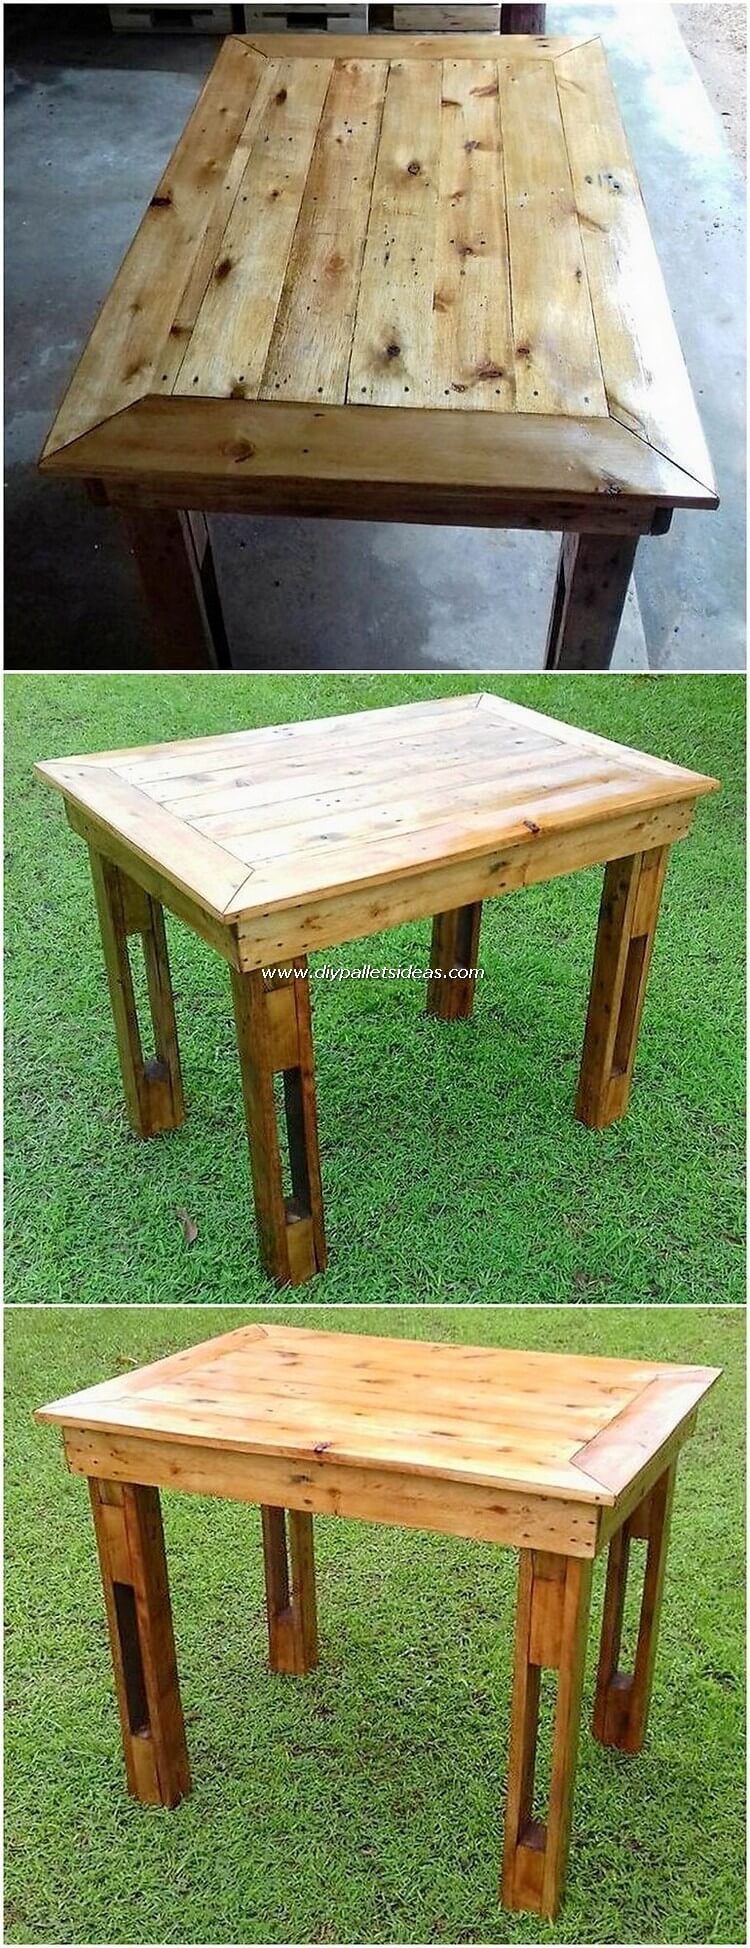 Marvelous DIY Ideas for Old Wood Pallets Reusing -   20 diy projects With Pallets old windows ideas